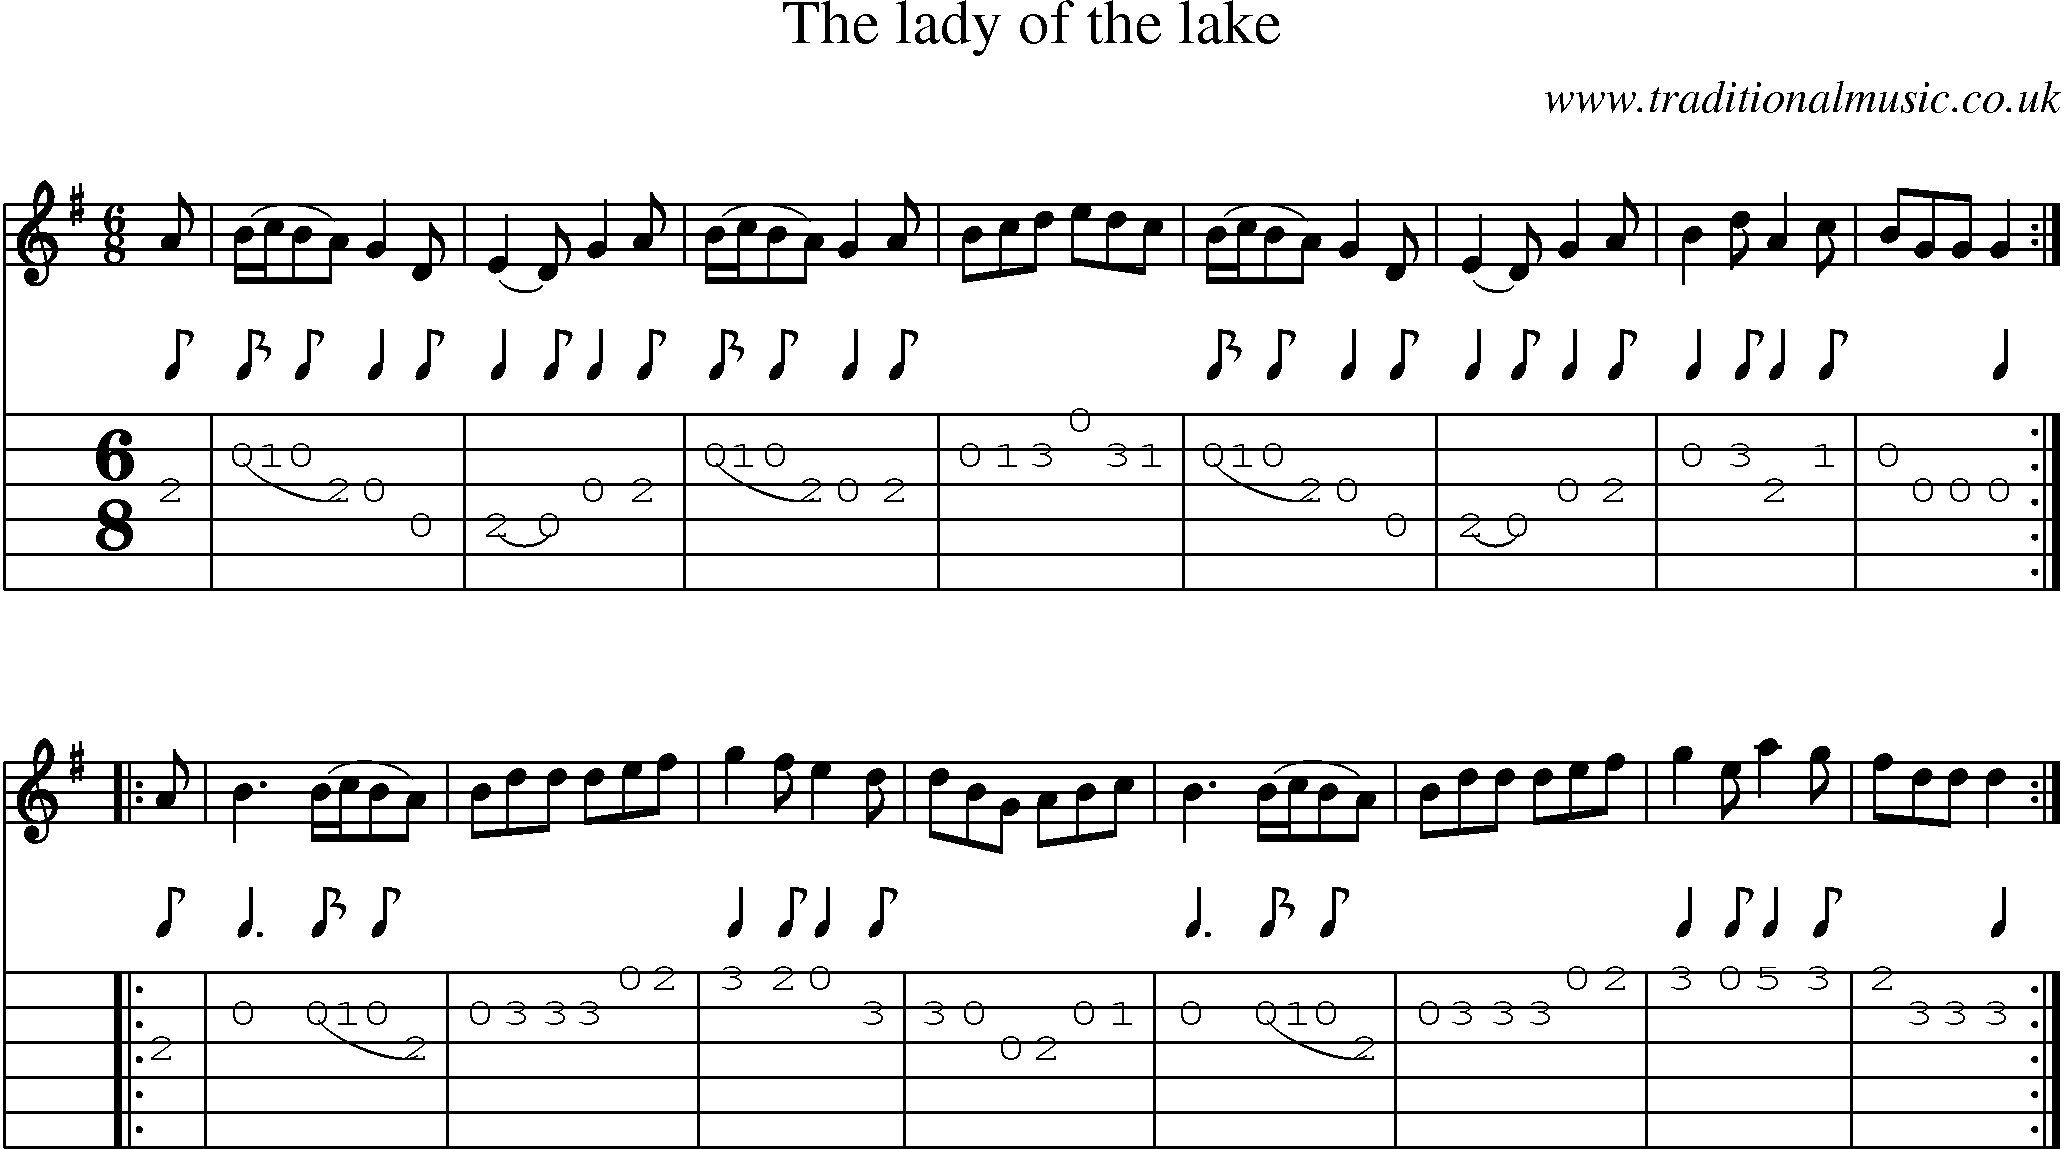 Music Score and Guitar Tabs for Lady Of The Lake